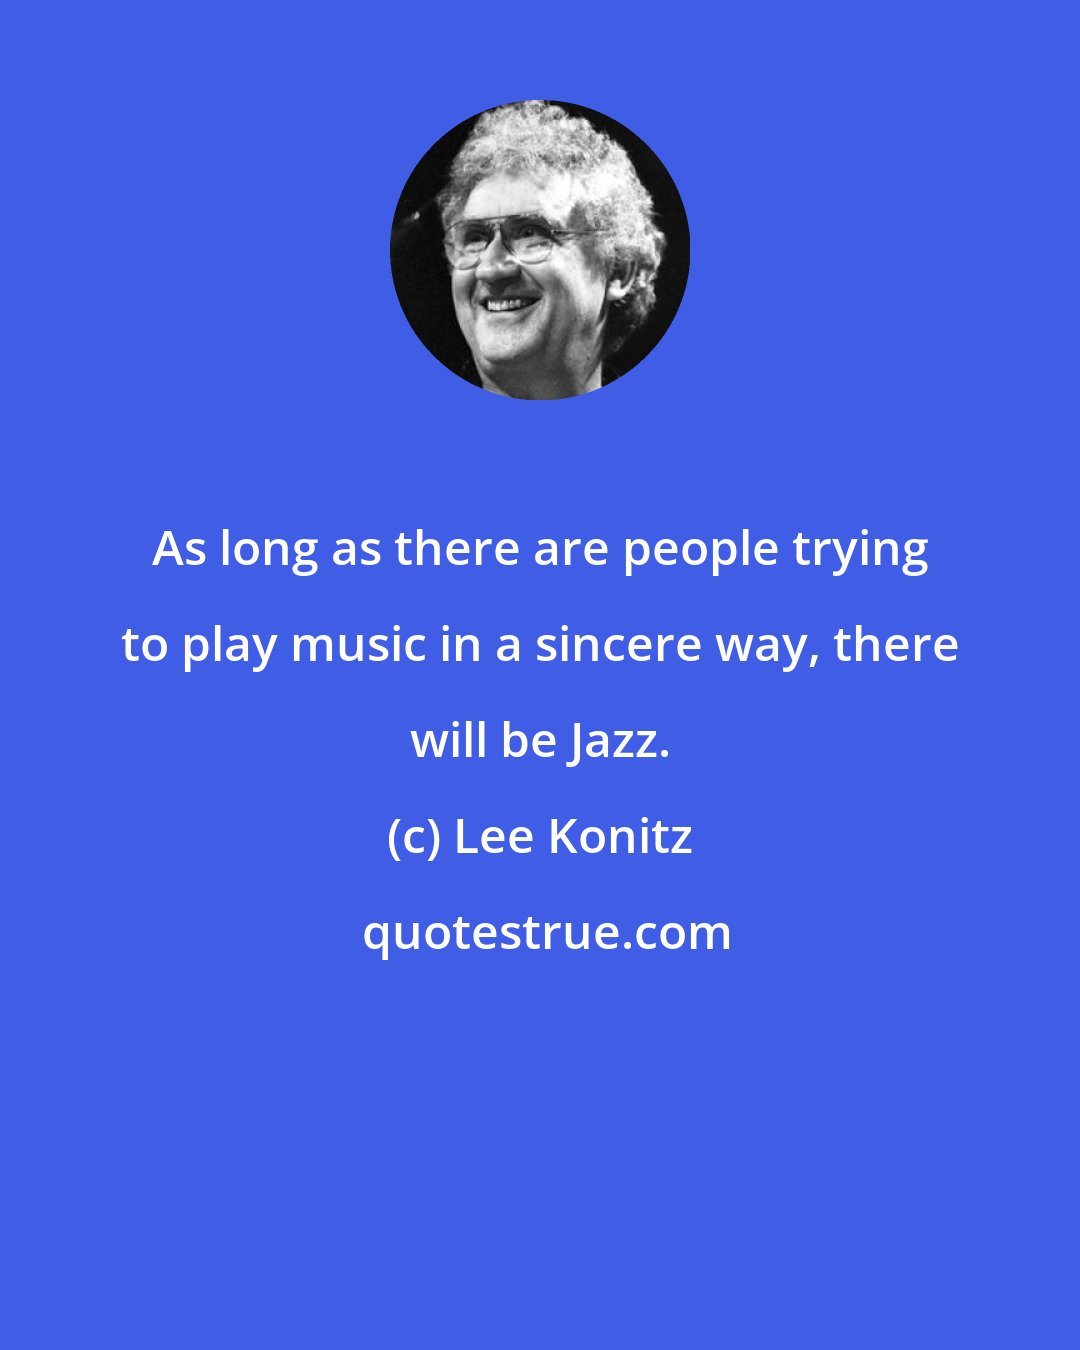 Lee Konitz: As long as there are people trying to play music in a sincere way, there will be Jazz.